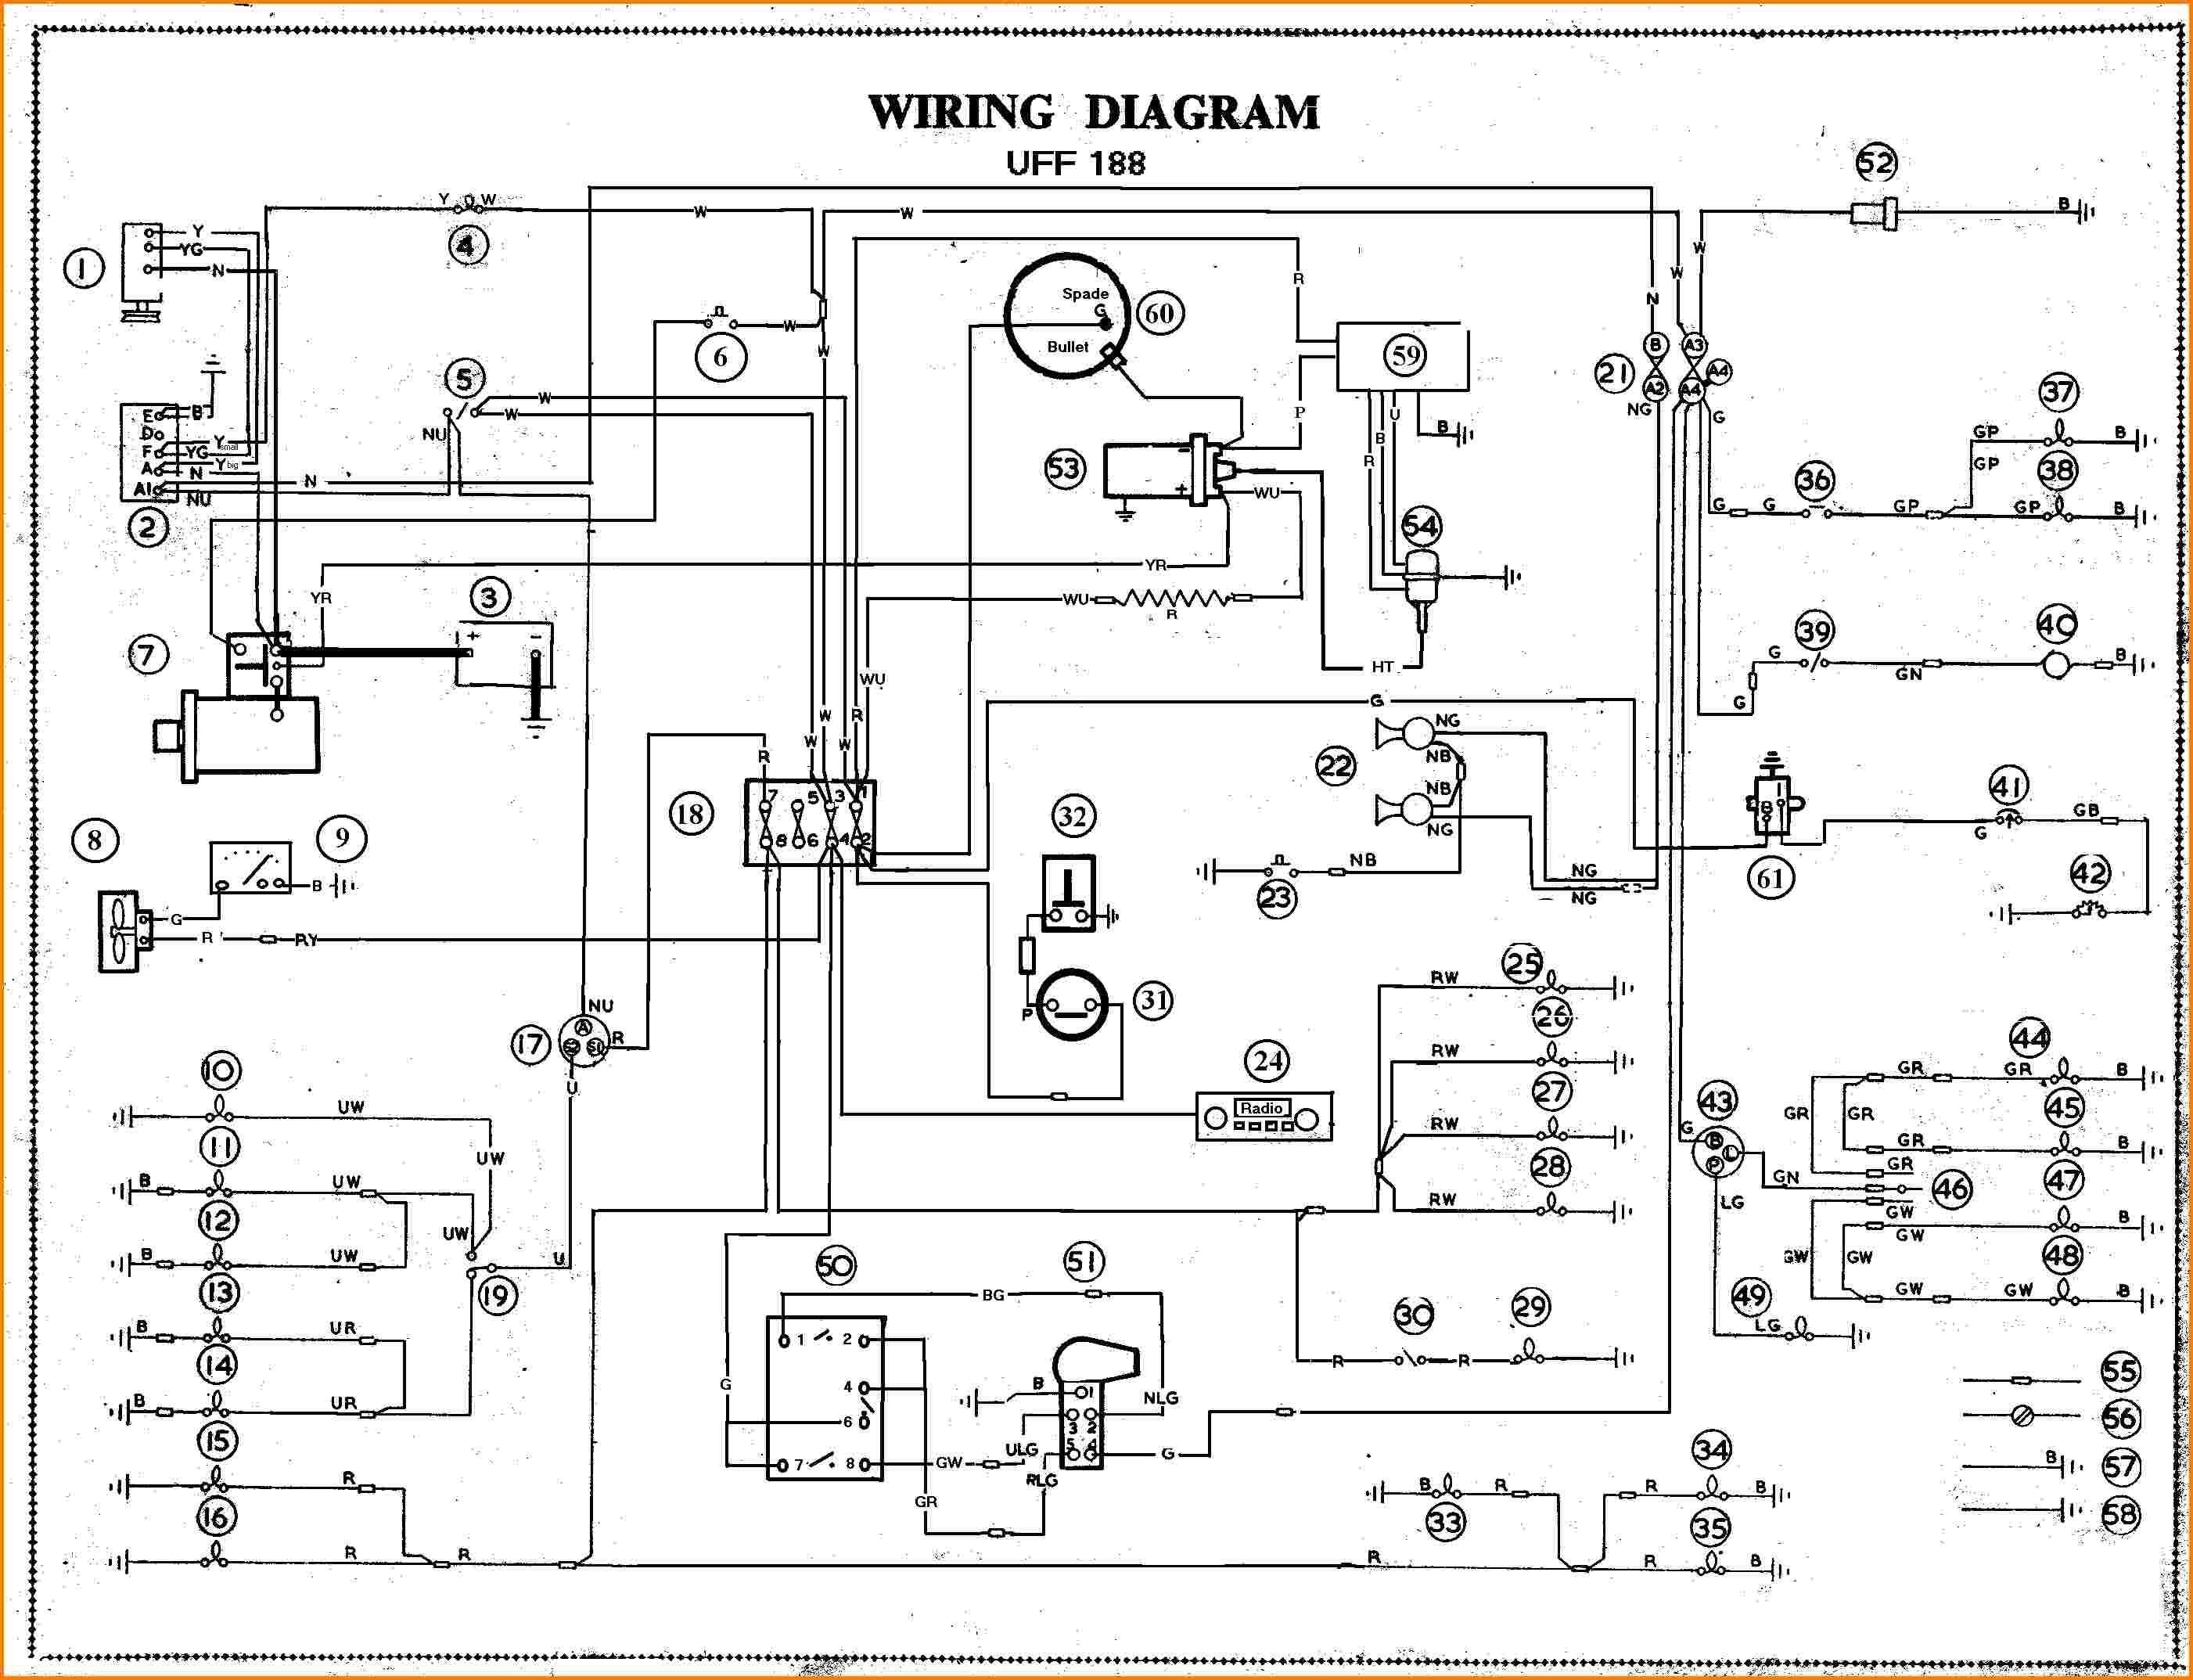 Cooling System Diagrams for Cars Auto Schematics Diagrams Wiring Diagram Paper Of Cooling System Diagrams for Cars